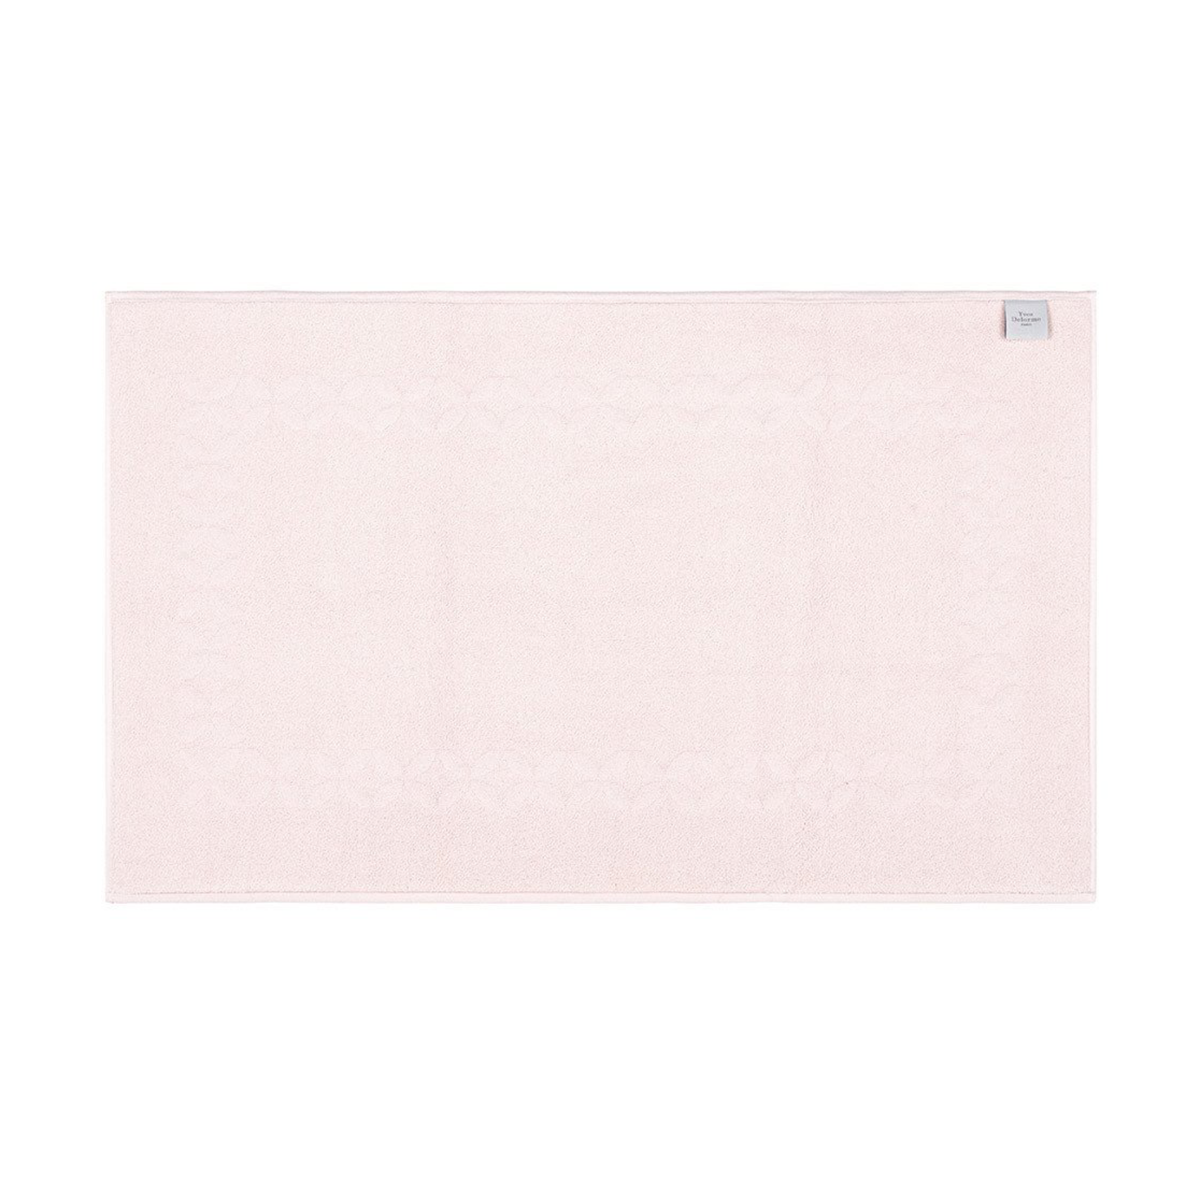 Top View of Yves Delorme Nature Bath Mat in Poudre Color